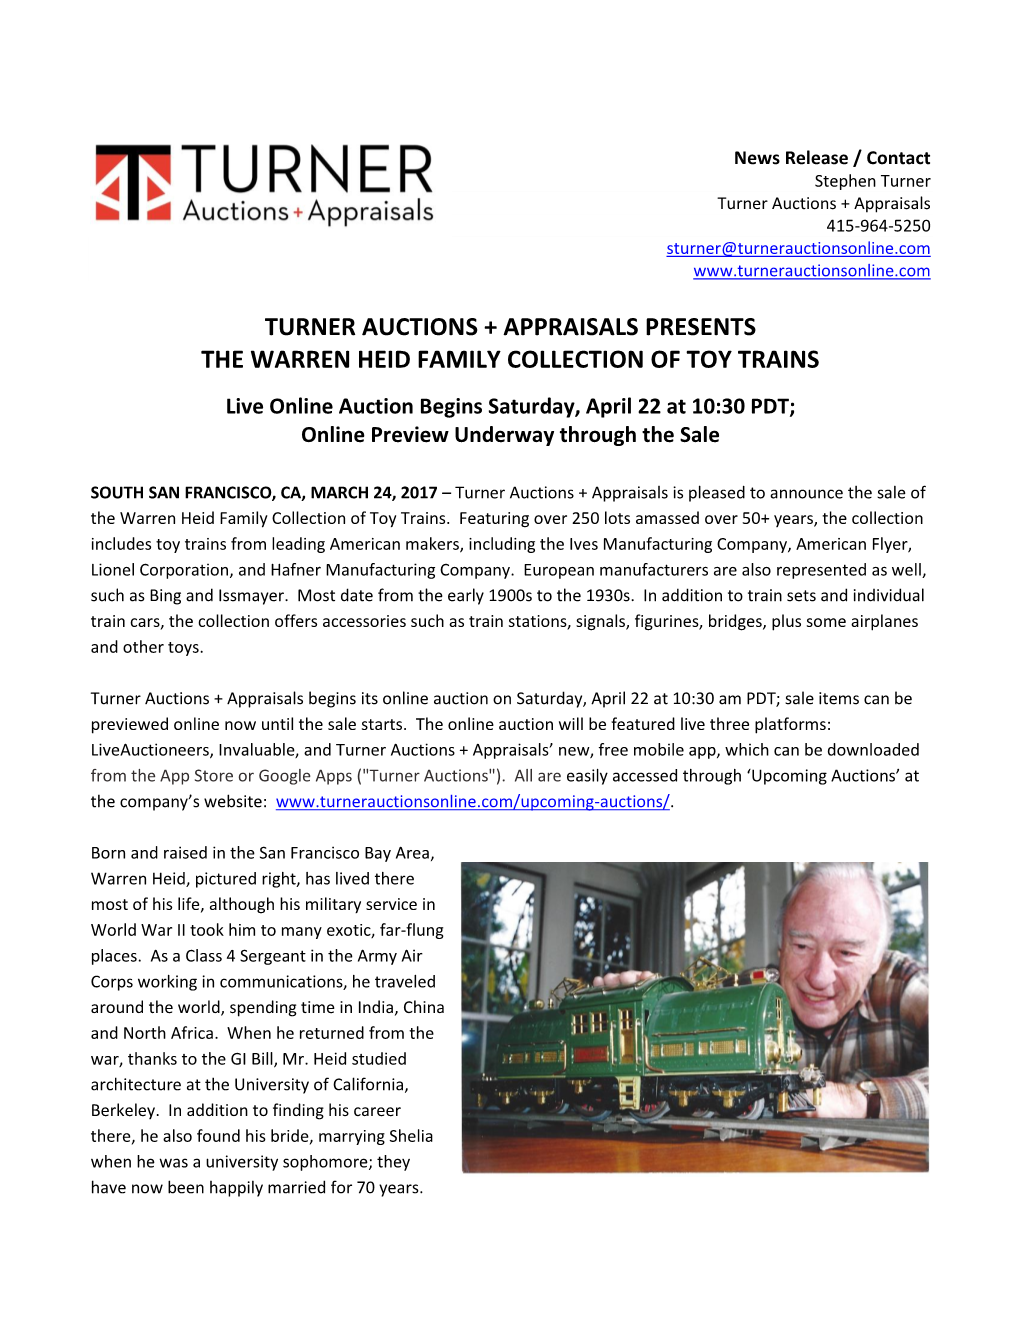 Turner Auctions + Appraisals Presents the Warren Heid Family Collection of Toy Trains